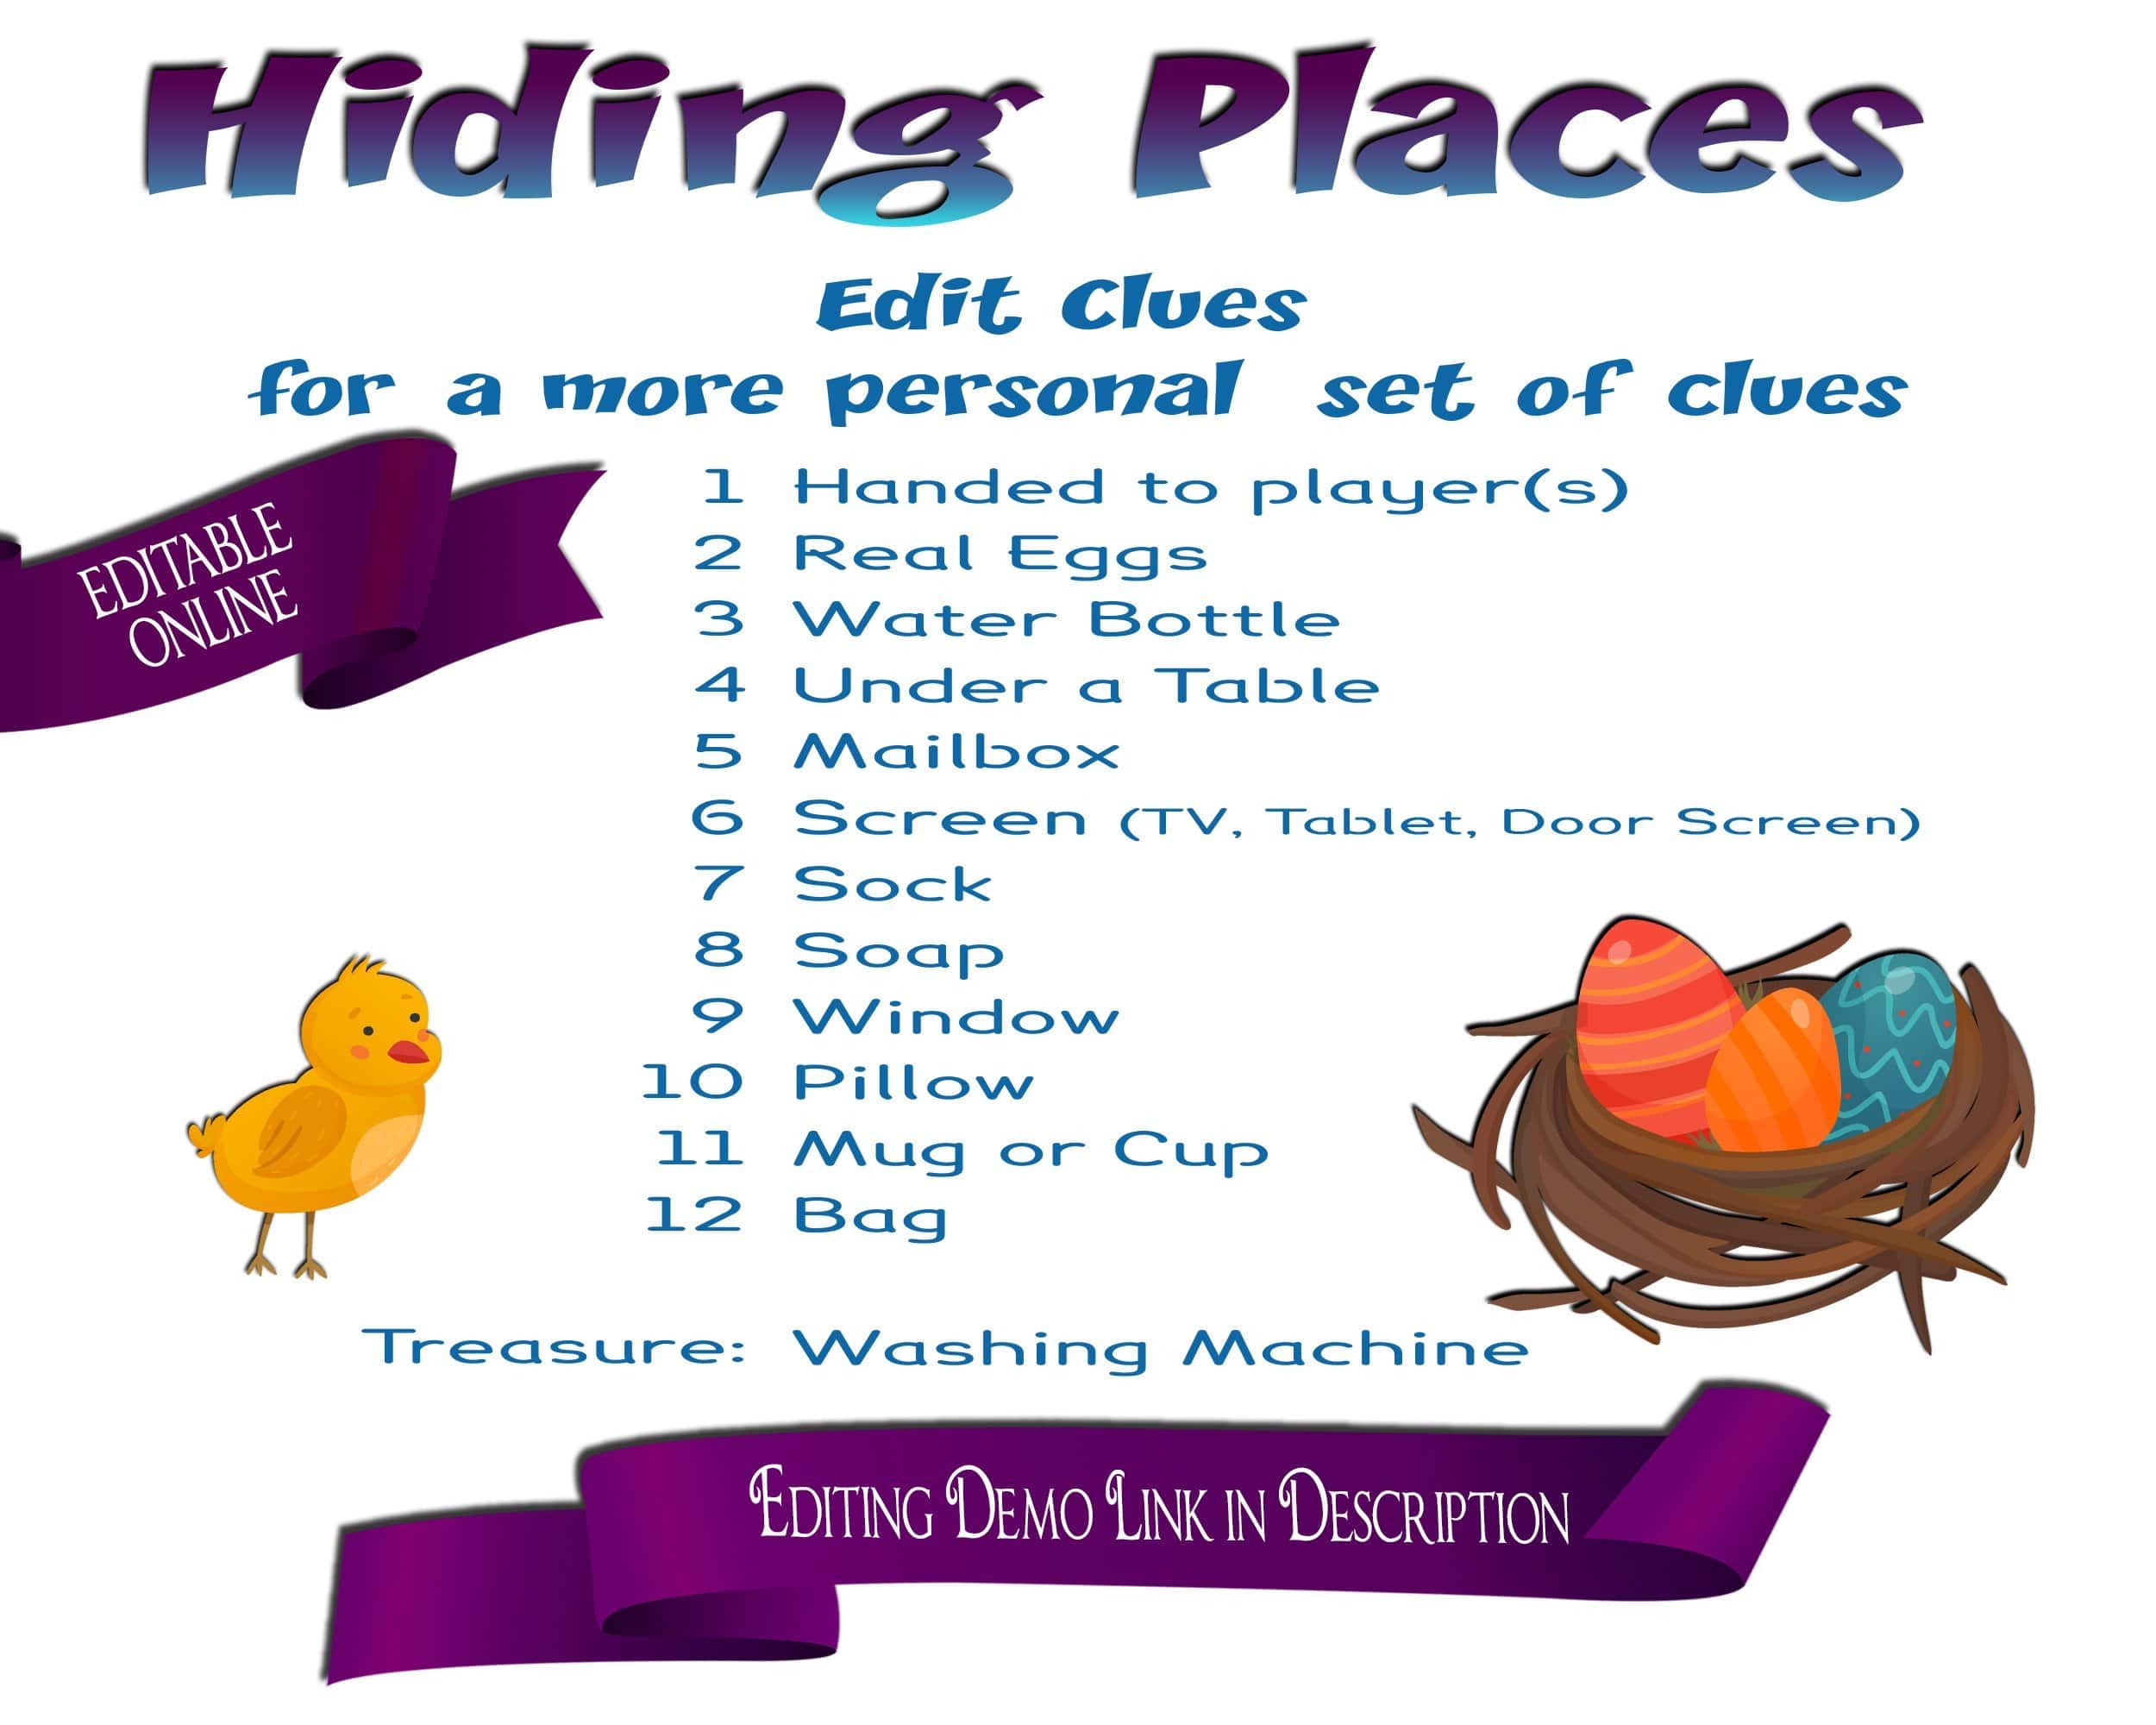 Challenging Easter Egg Treasure Hunt Puzzles - Open Chests